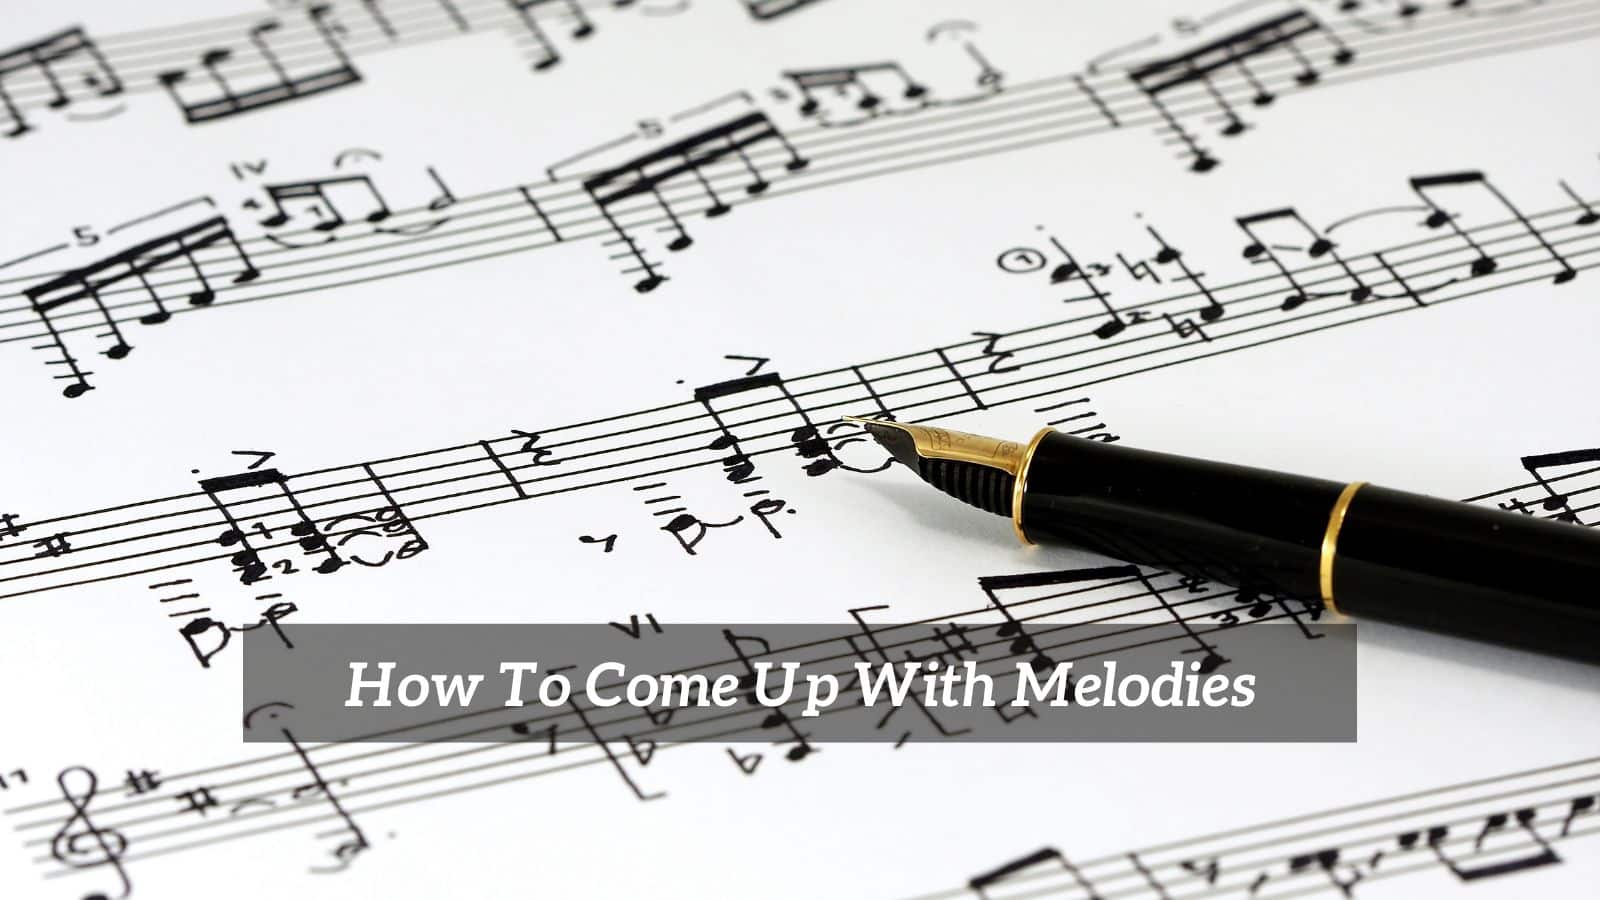 How To Come Up With Melodies